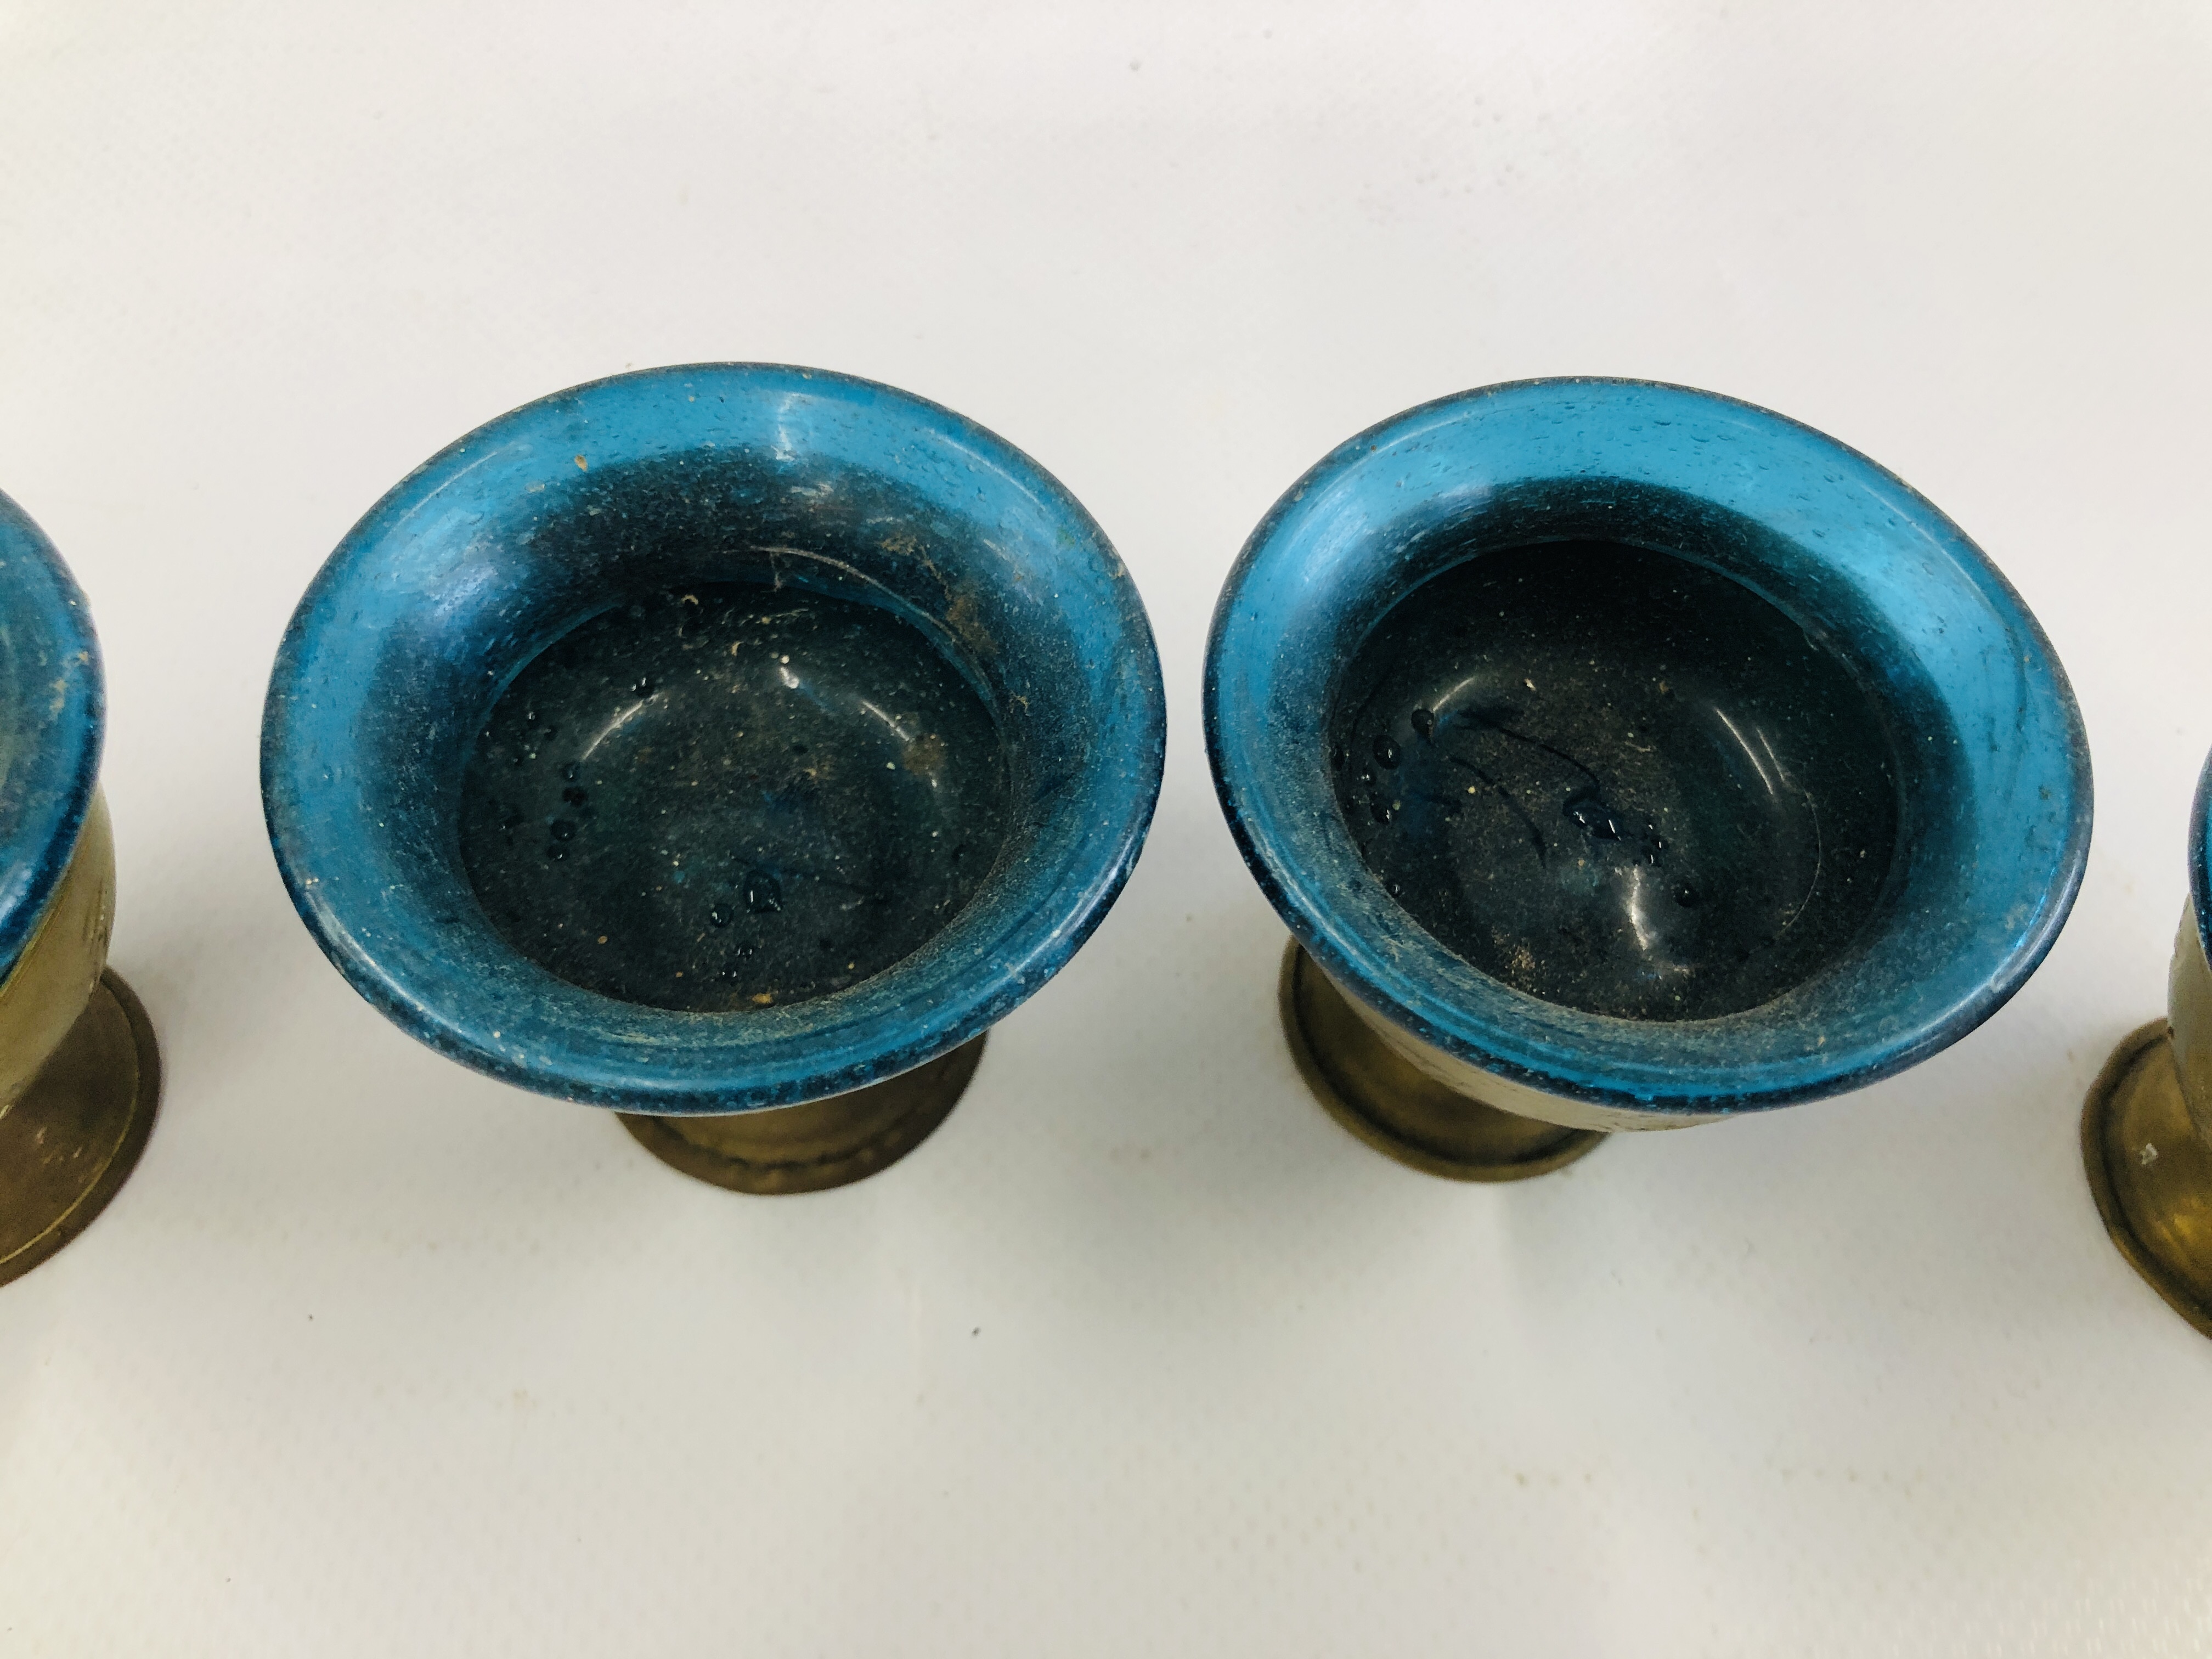 A SET OF SIX MIDDLE EASTERN BRASS GOBLET VESSELS WITH BLUE GLASS LINERS. - Image 6 of 11